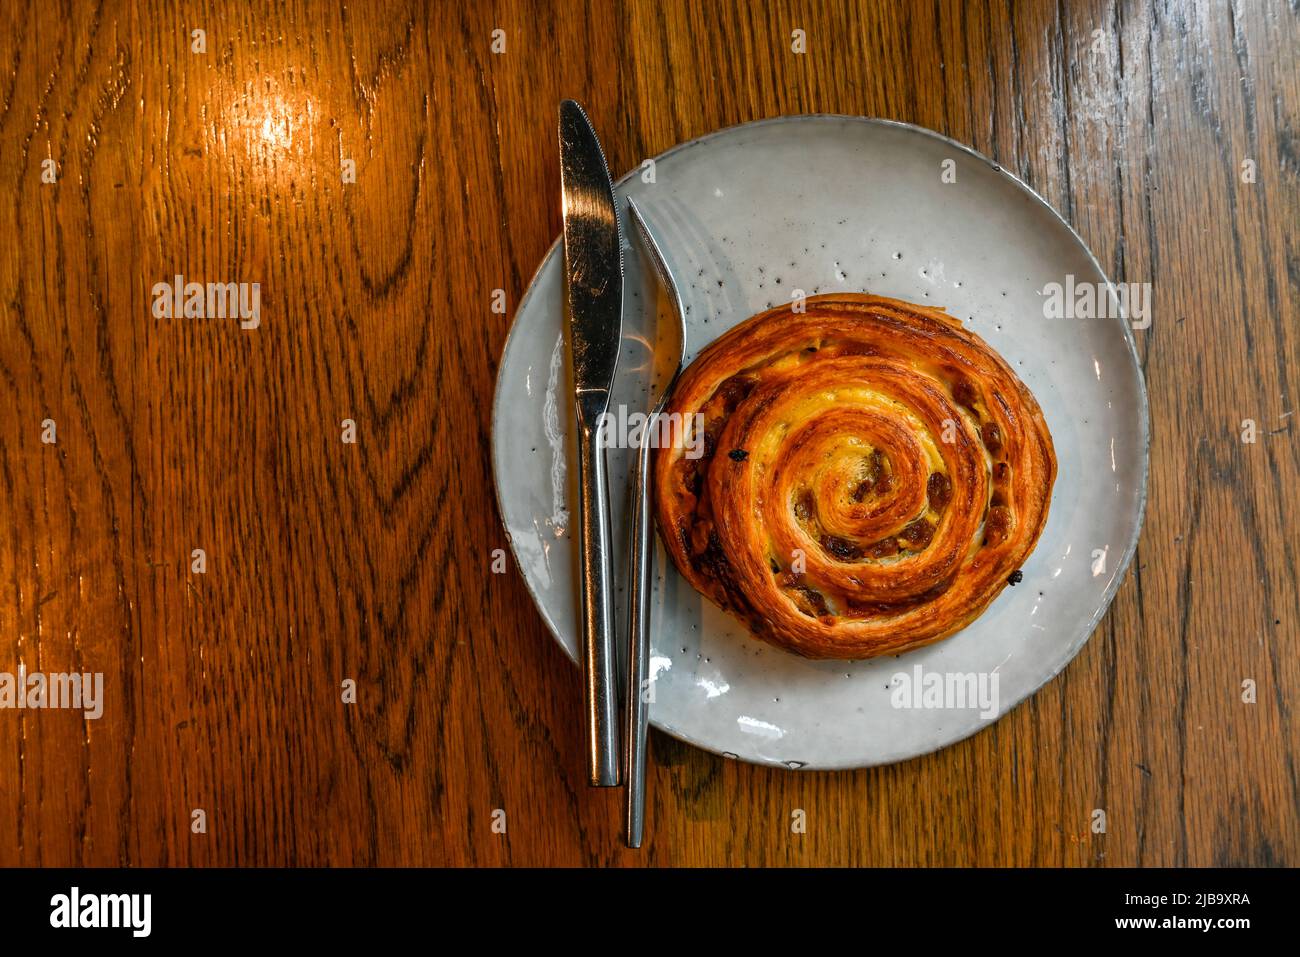 Swirl bun with raisins on a wooden table top view Stock Photo